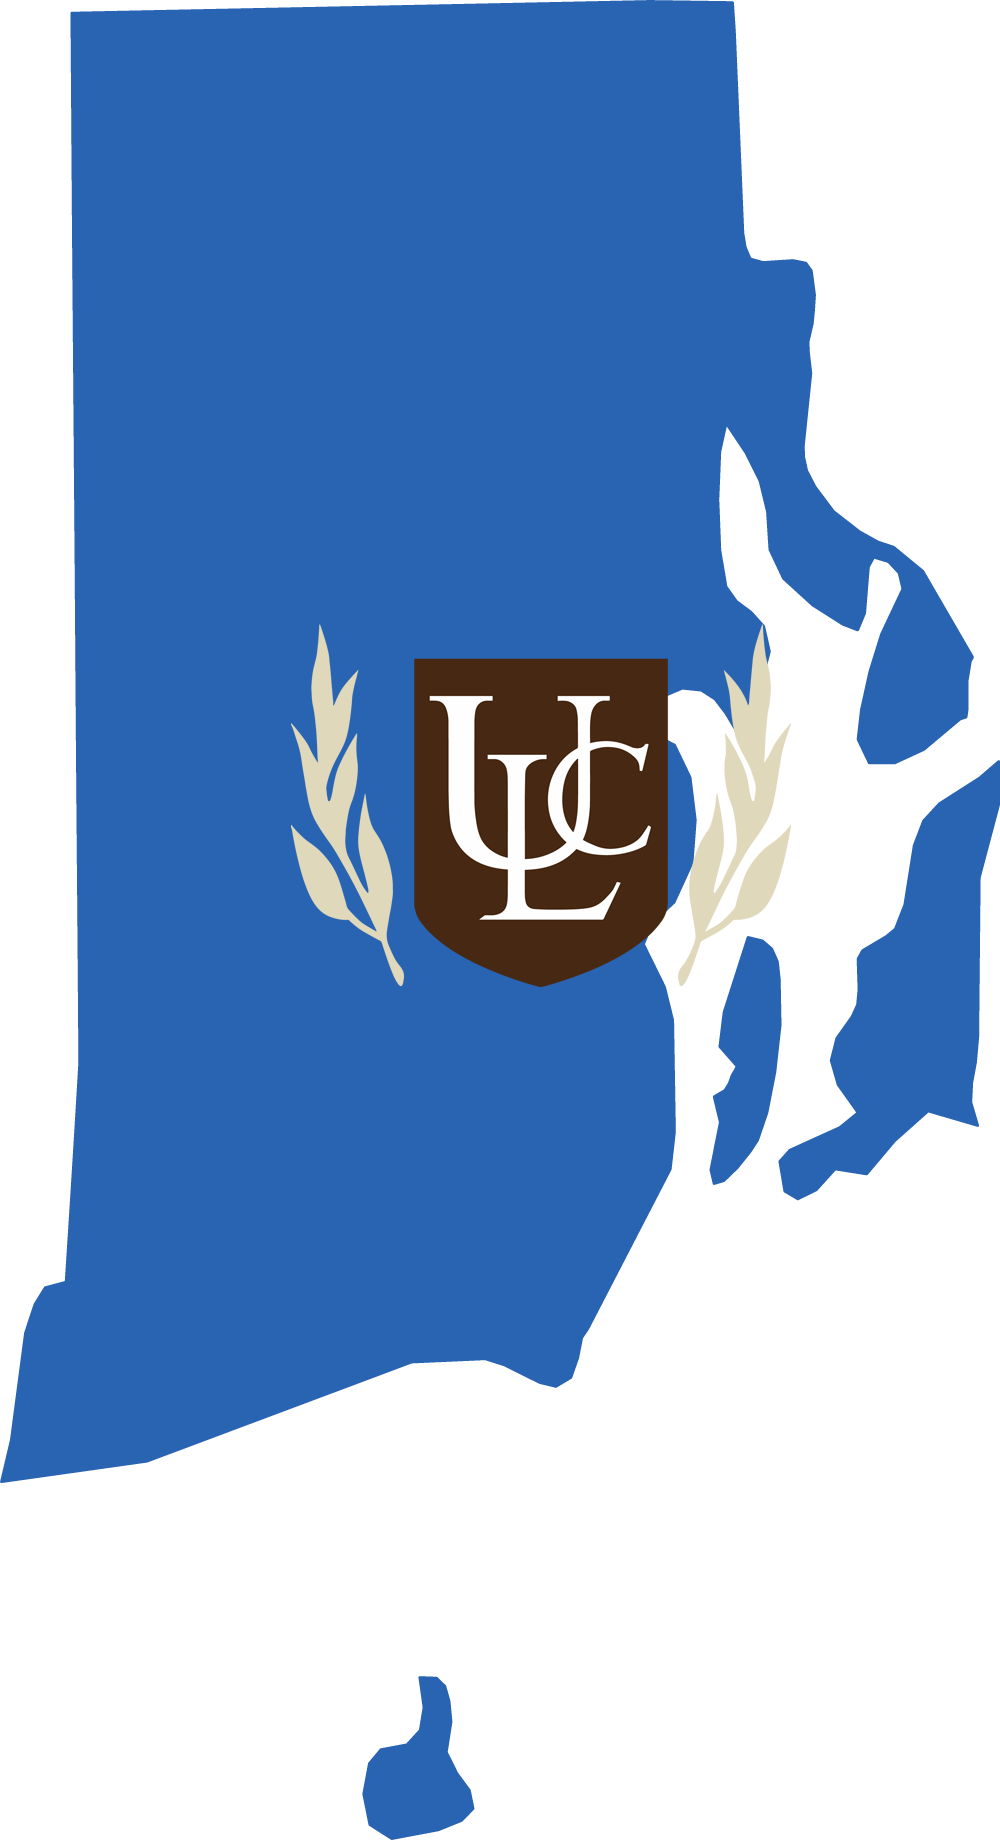 An outline of Rhode Island with the ULC logo